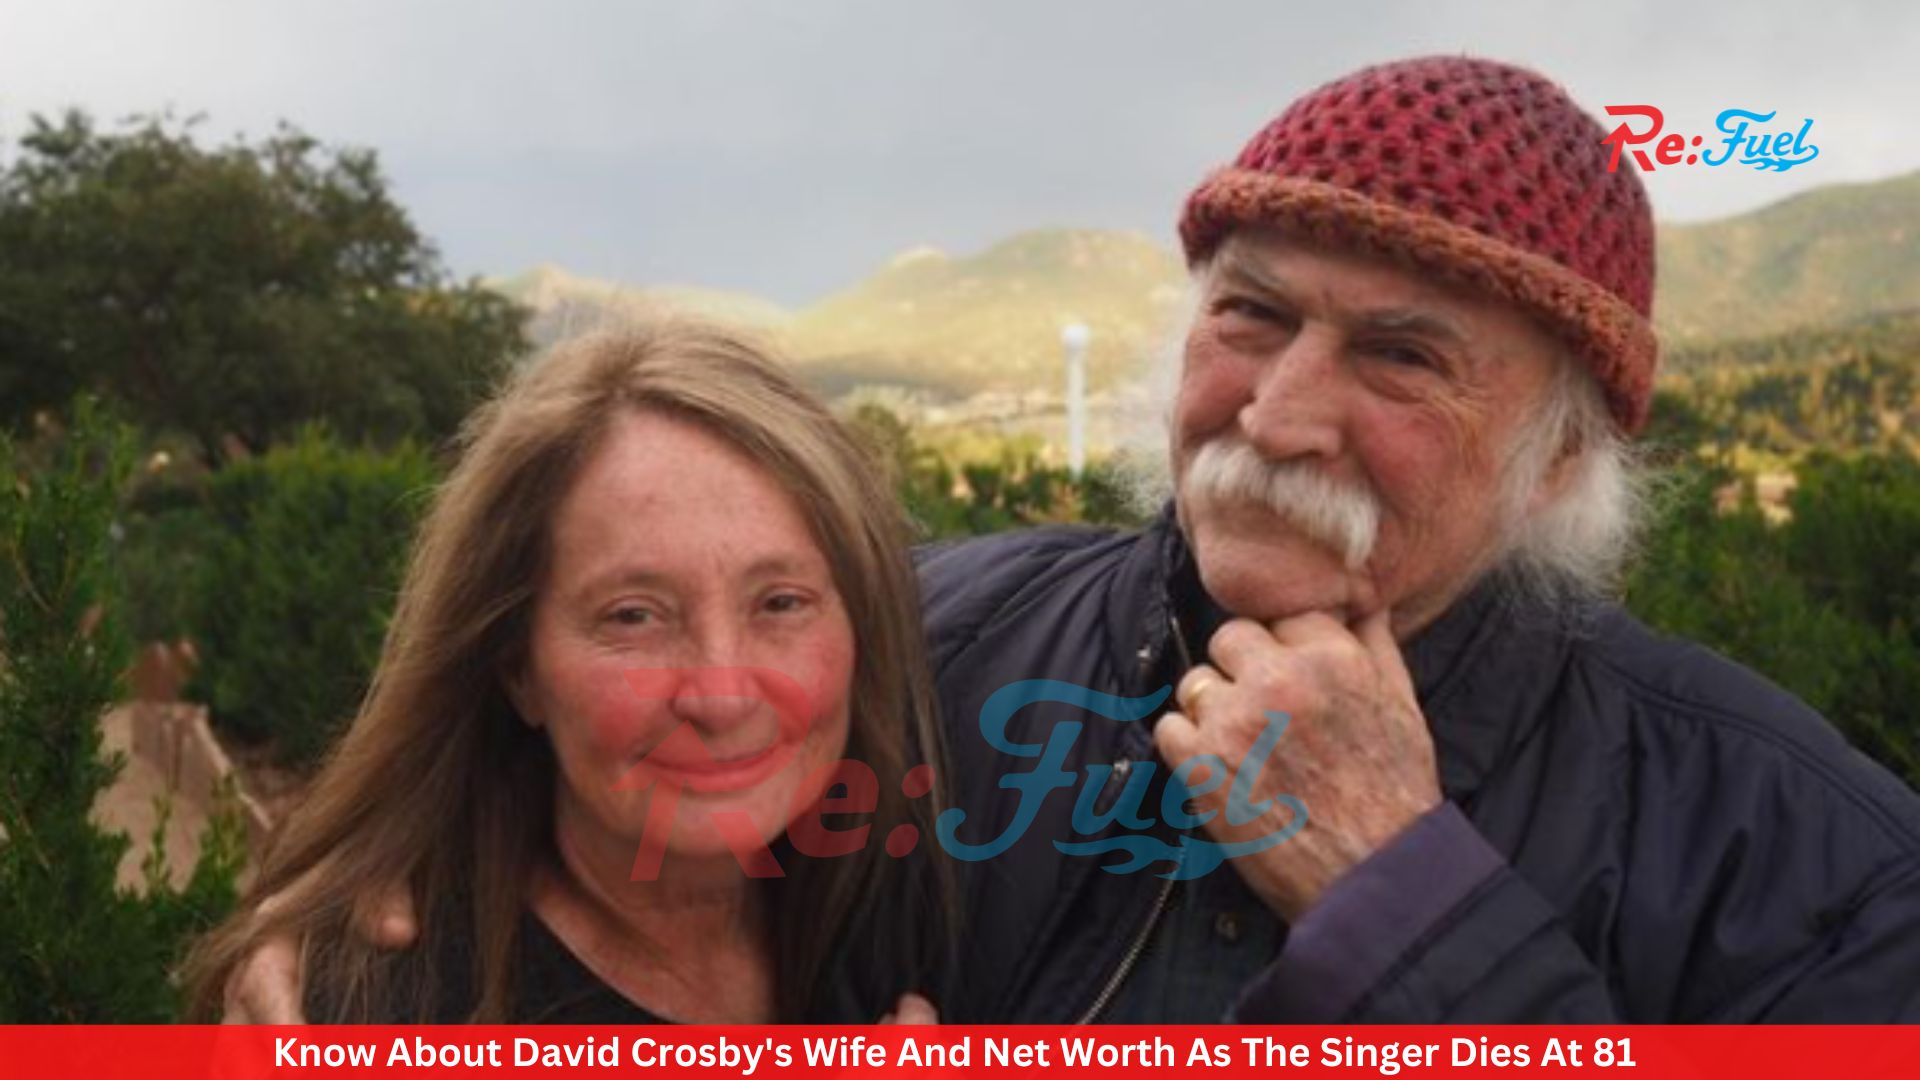 Know About David Crosby's Wife And Net Worth As The Singer Dies At 81